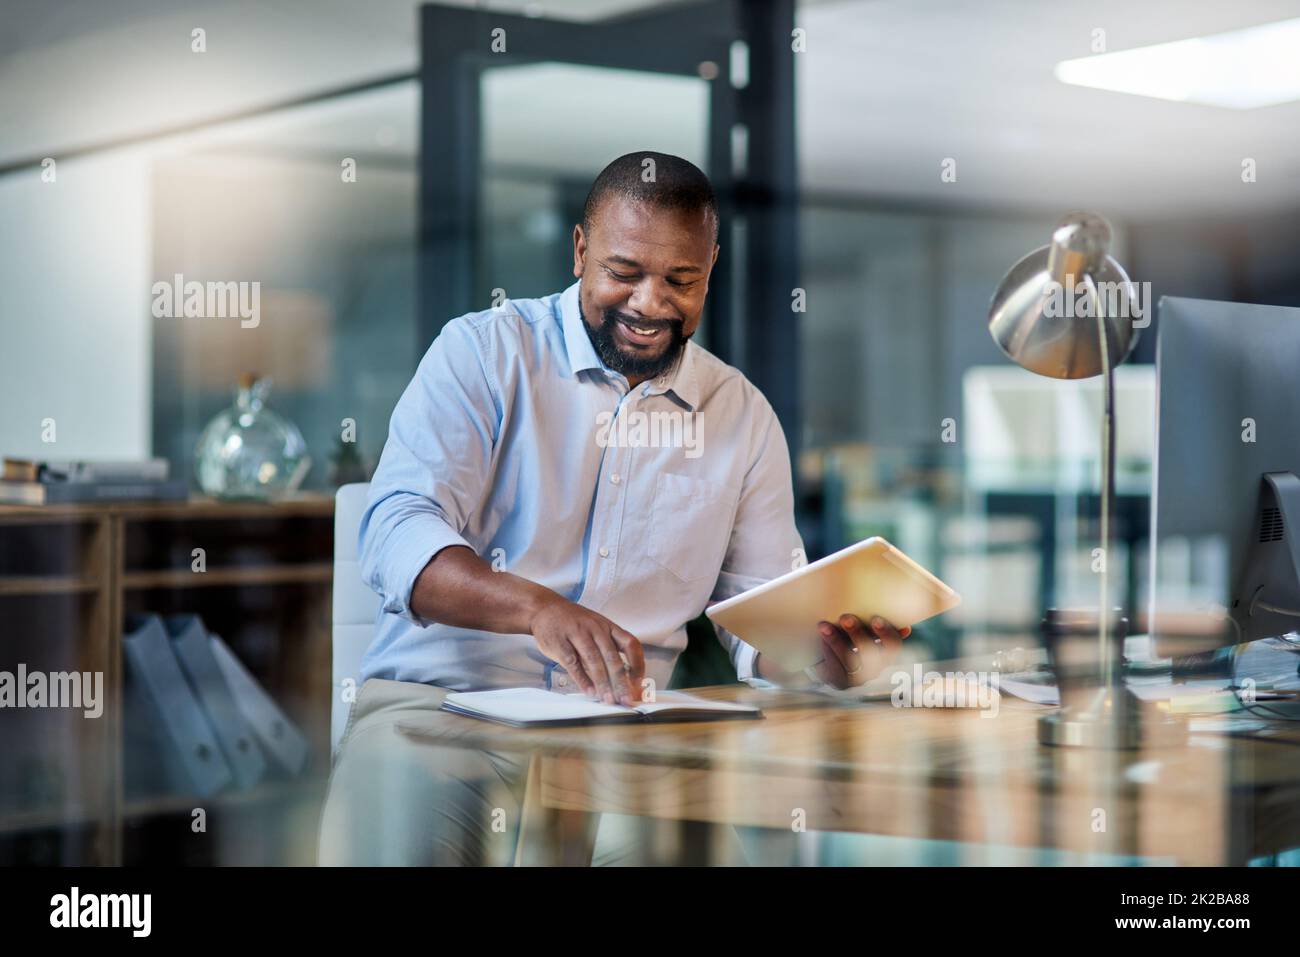 Another goal reached during tonights shift. Cropped shot of a handsome mature businessman sitting alone in his office at night and using a tablet. Stock Photo